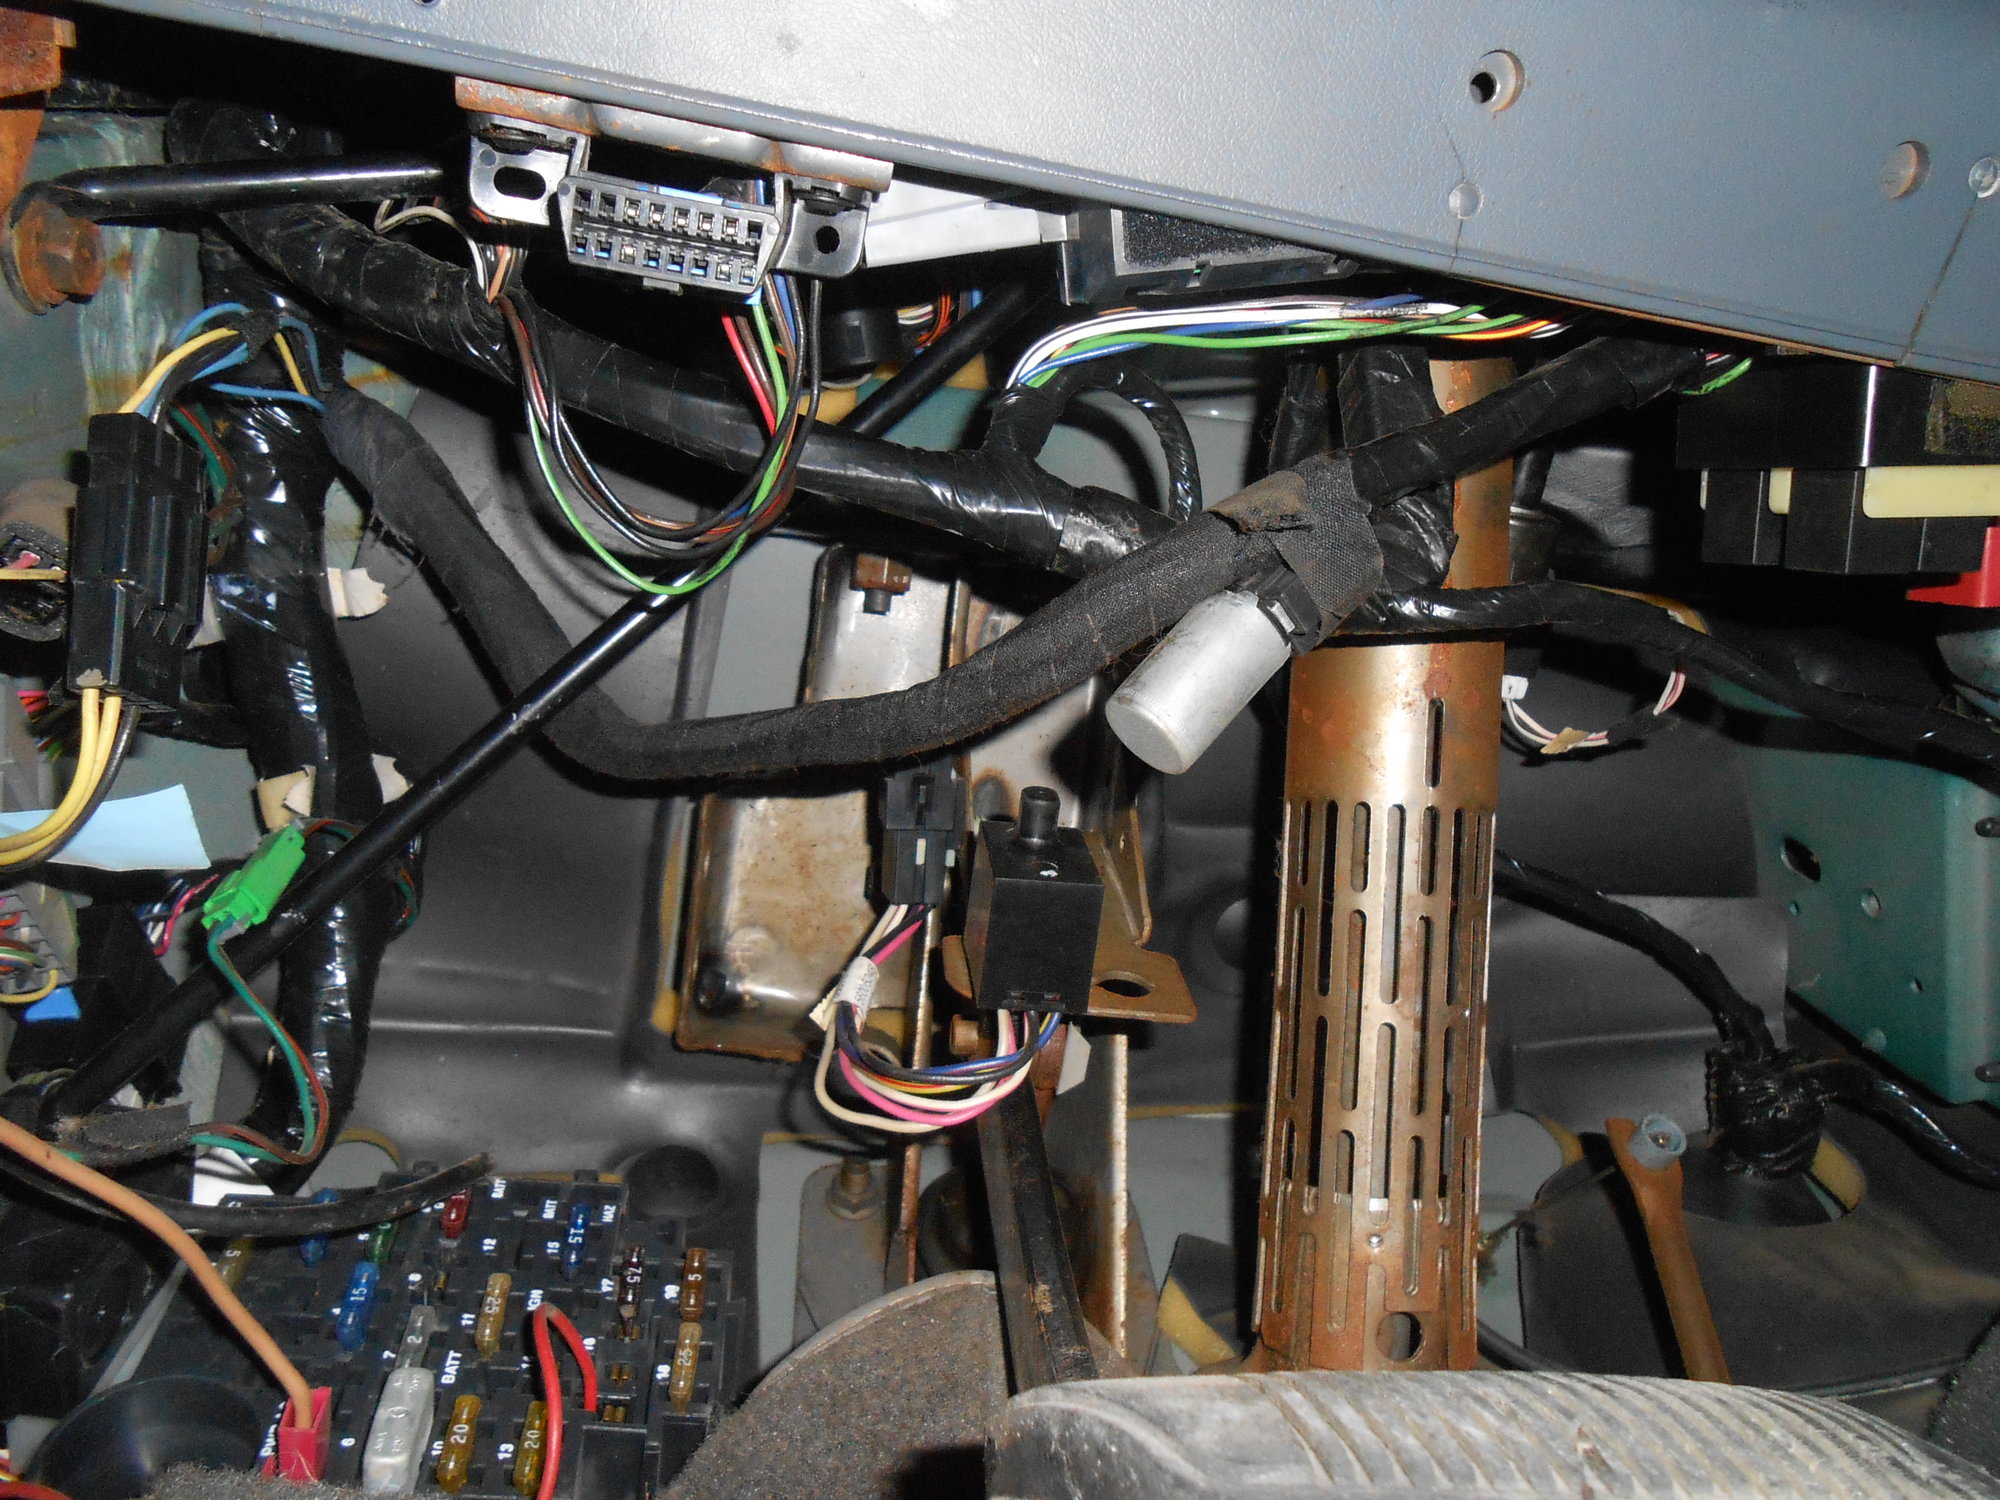 Underdash wiring, Where do these 2 plugs go? Picture - Jeep Cherokee Forum Jeep Cherokee Fuse Box Jeep Cherokee Forum